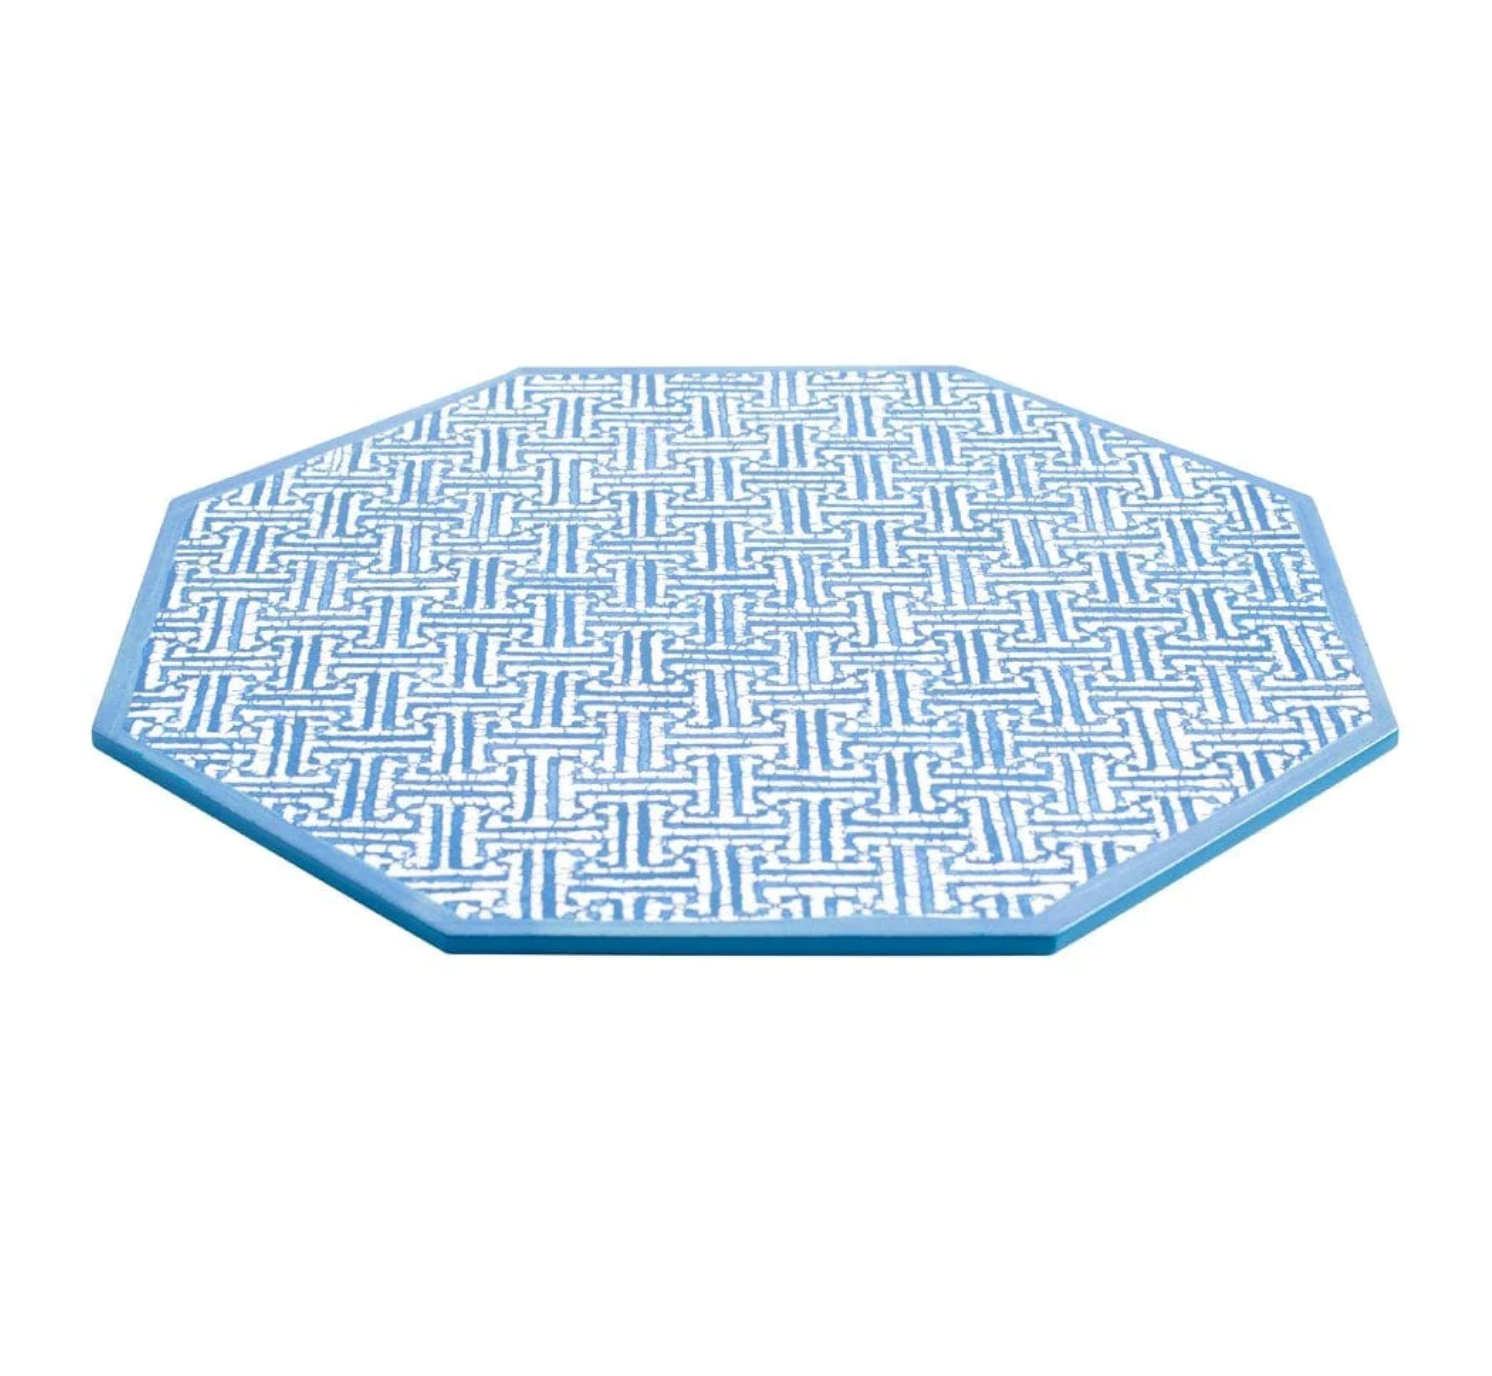 Fretwork Octagonal Lacquer Placemat in Blue Set/4